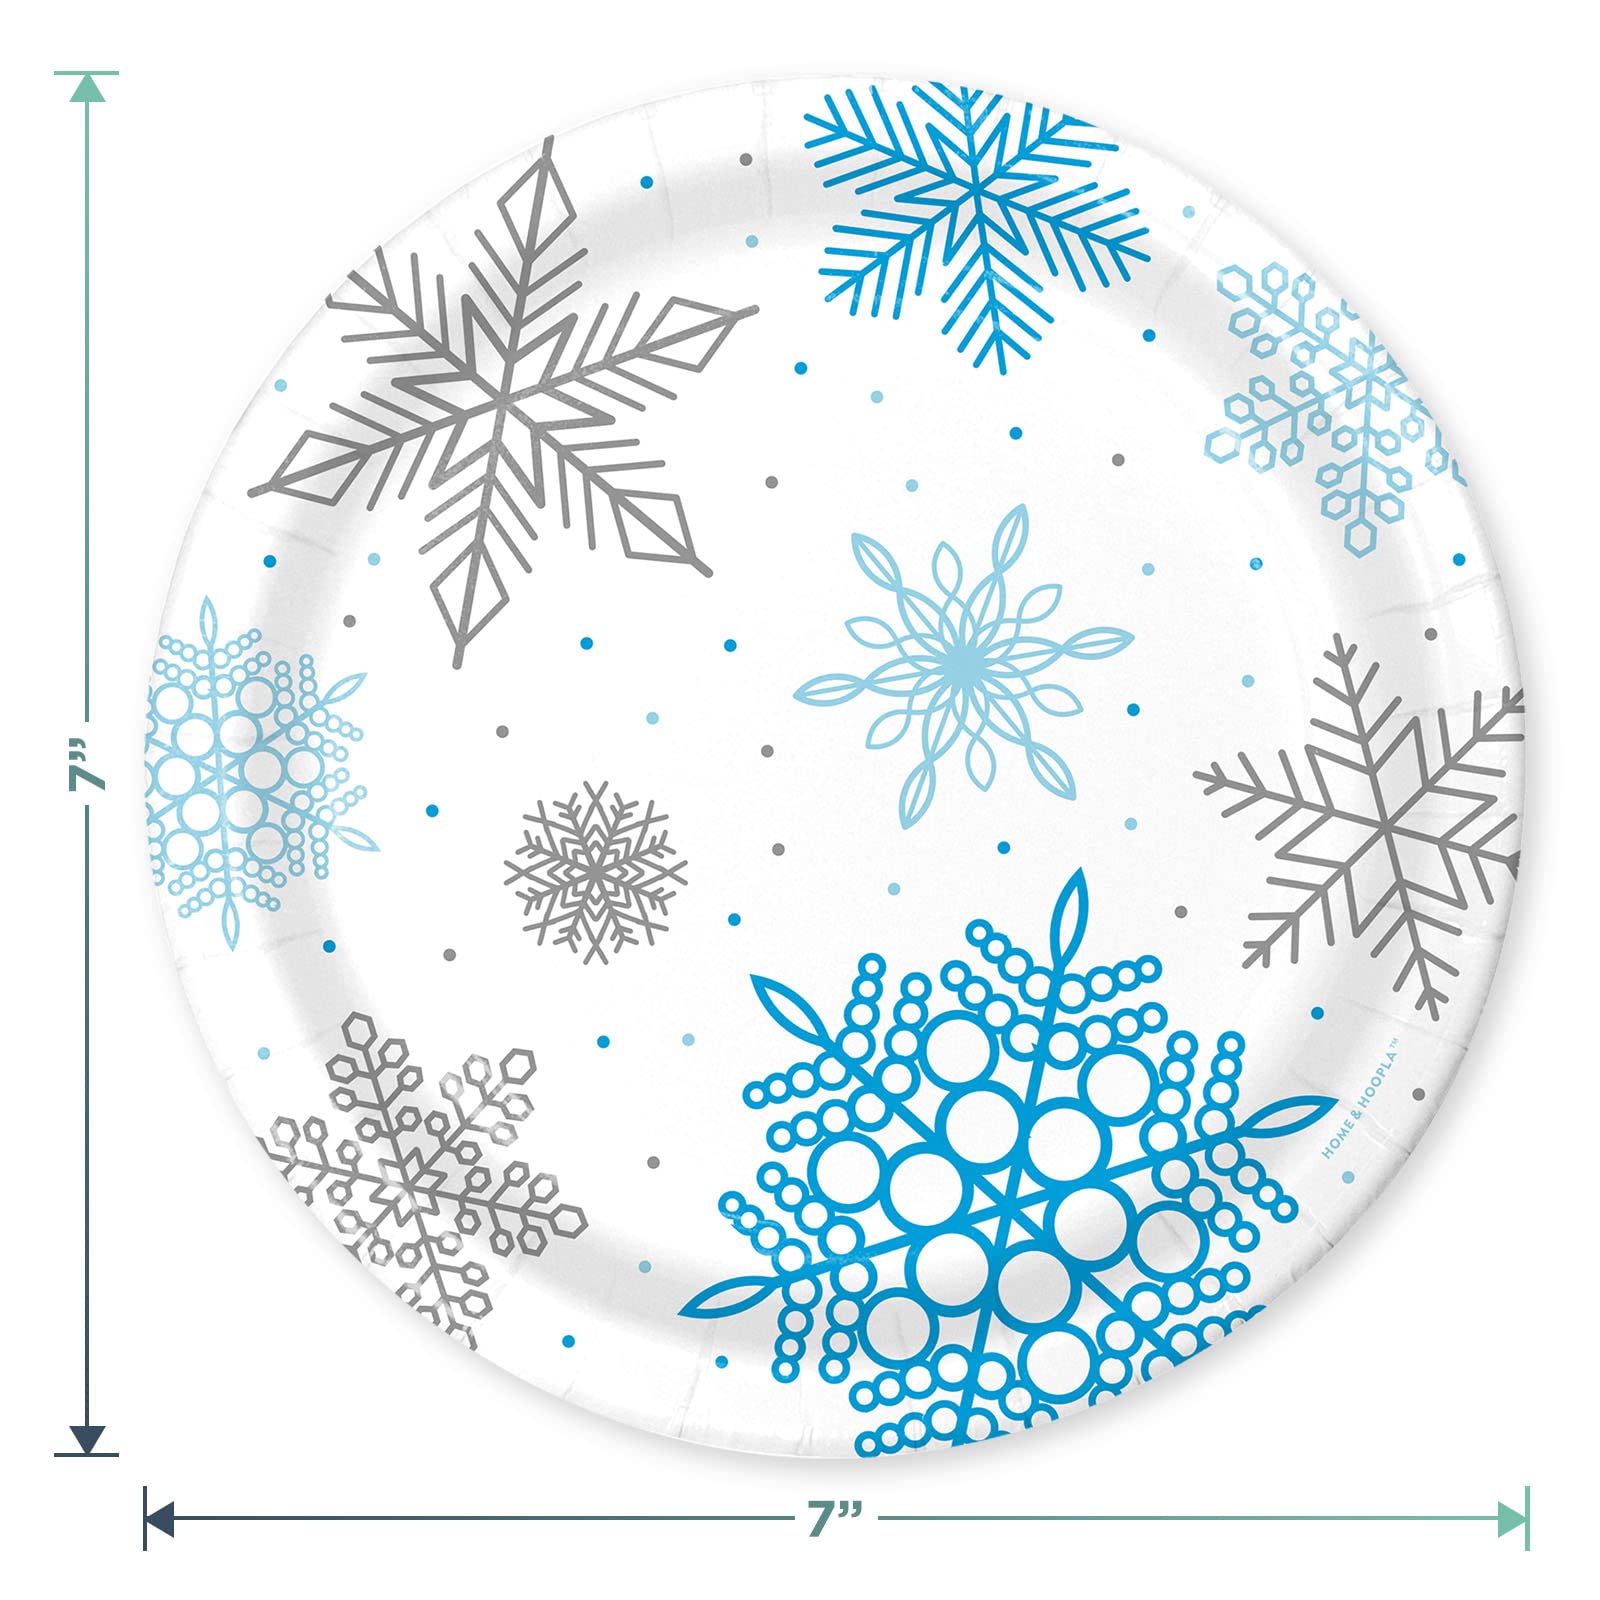 Frozen Birthday Party Supplies, 121 PCS Christmas Snowflake Paper Plates  and Nap